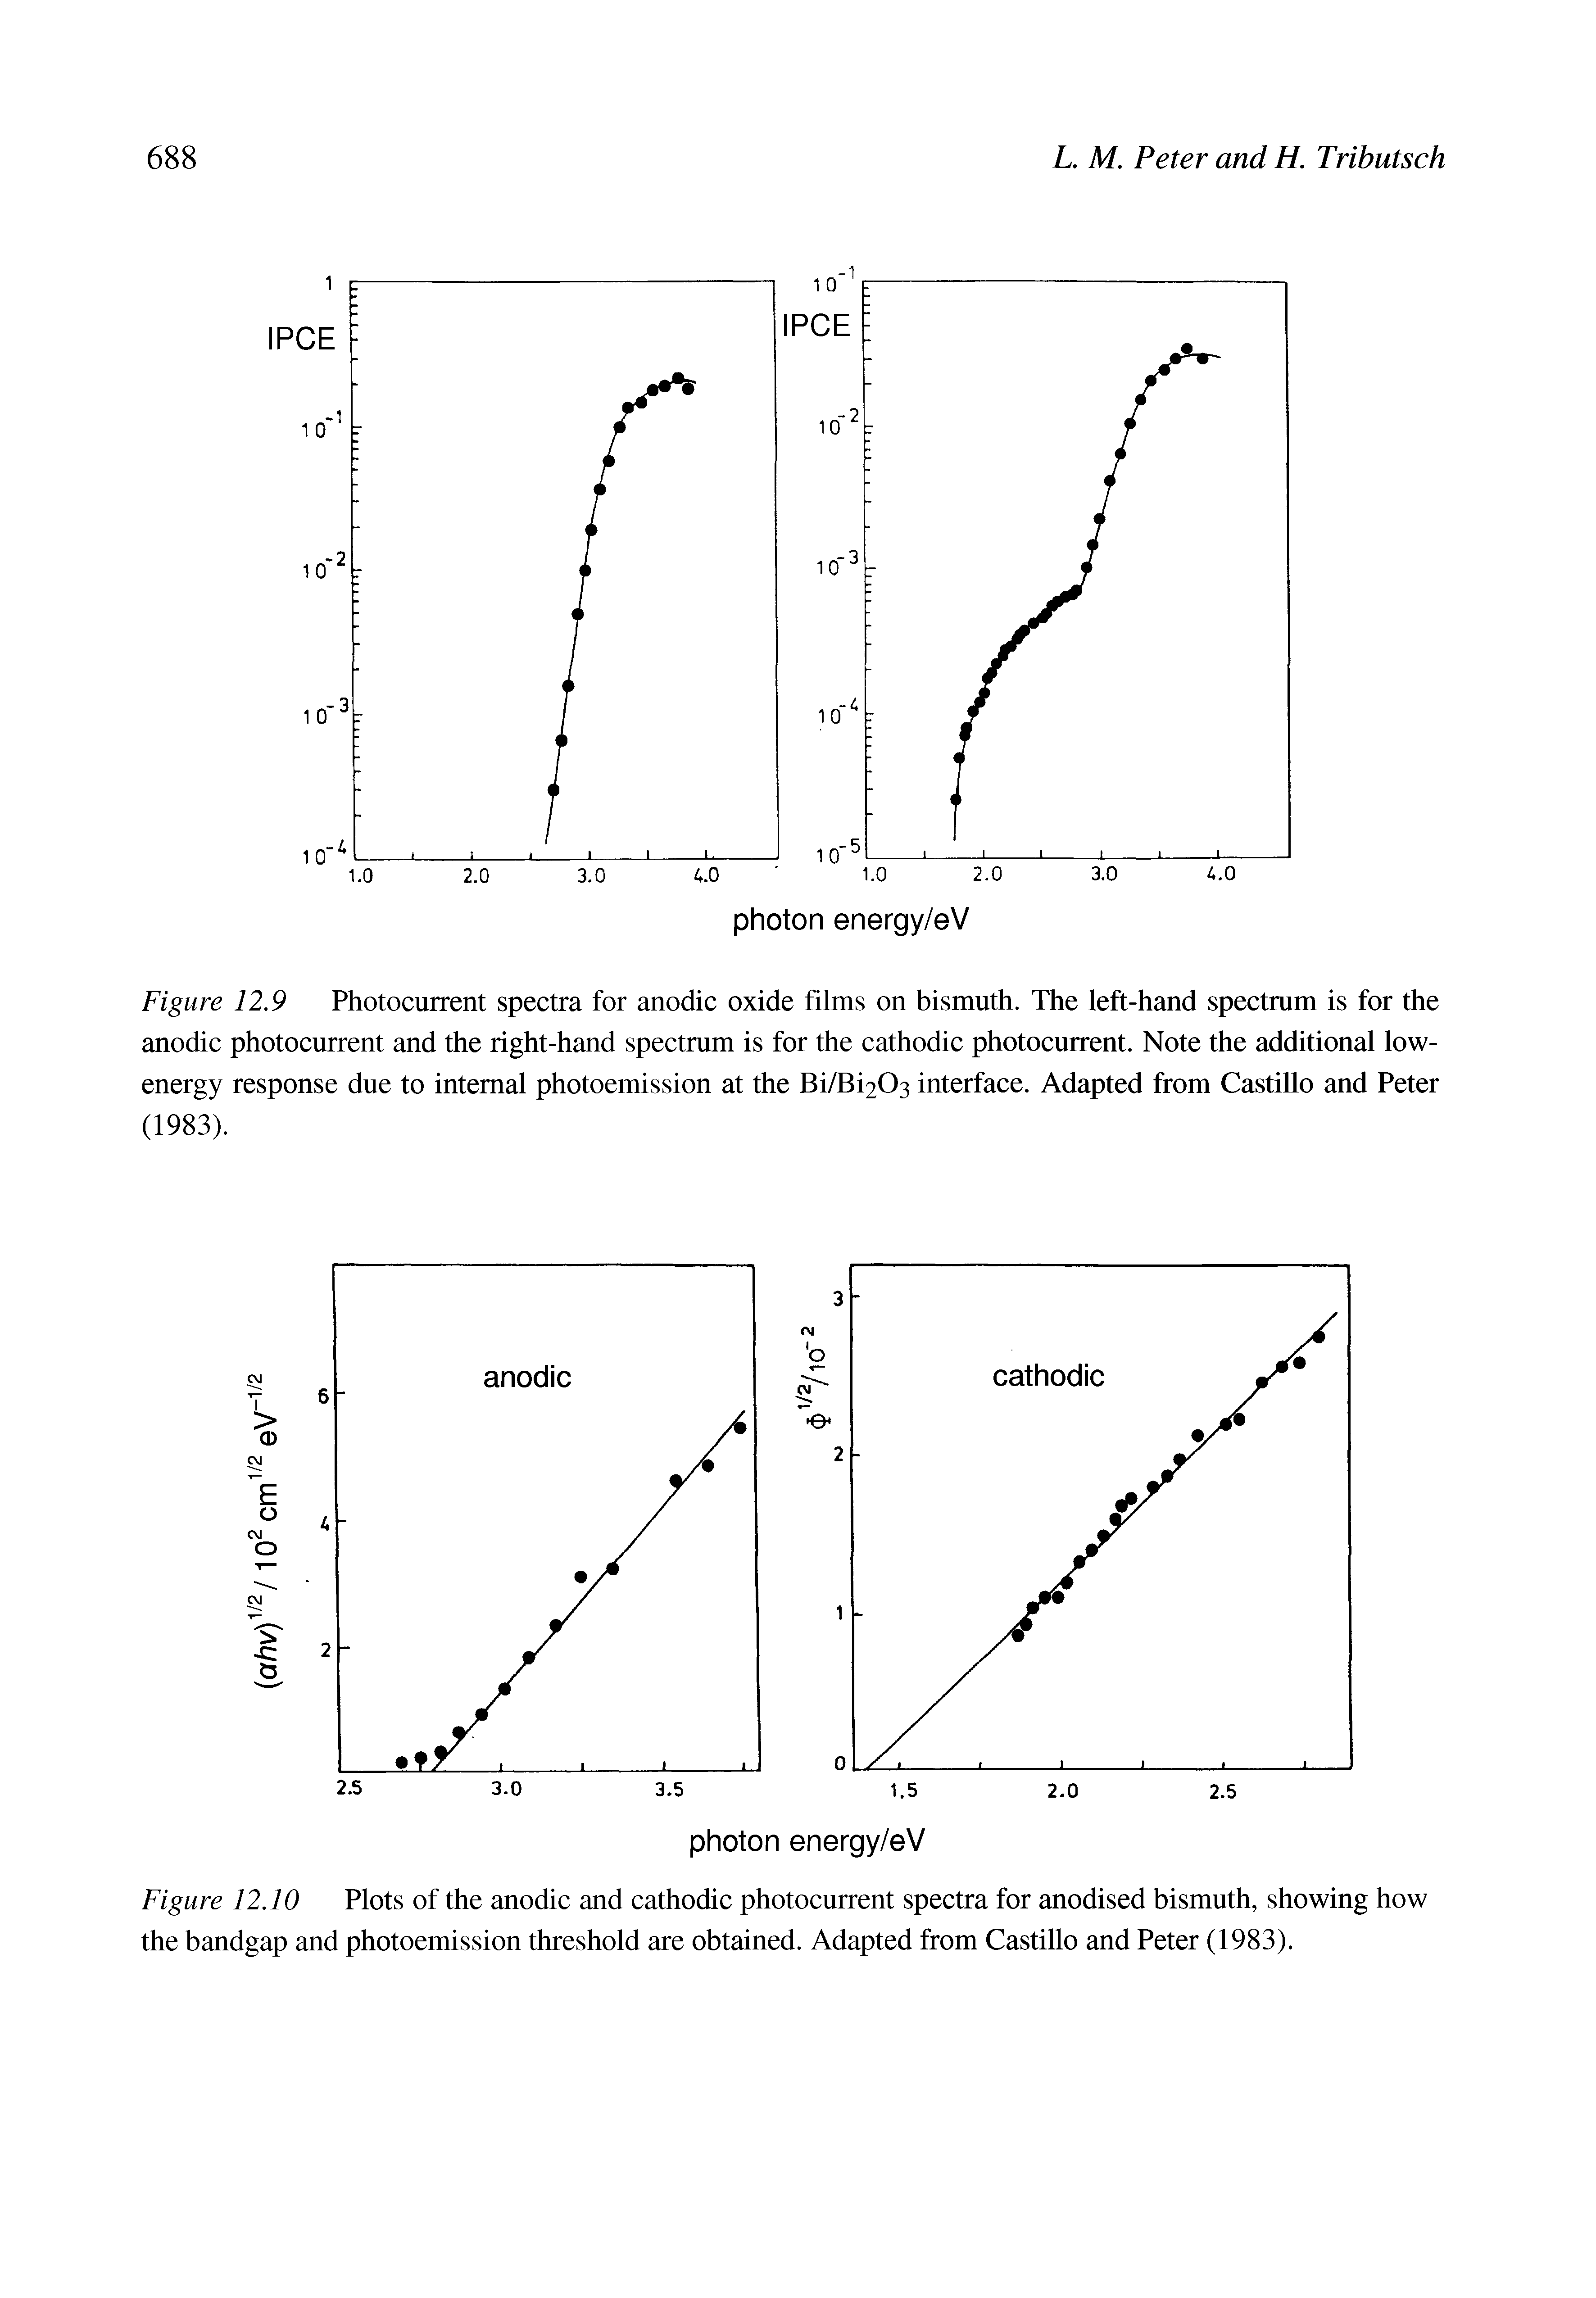 Figure 12.9 Photocurrent spectra for anodic oxide films on bismuth. The left-hand spectrum is for the anodic photocurrent and the right-hand spectrum is for the cathodic photocurrent. Note the additional low-energy response due to internal photoemission at the Bi/Bi203 interface. Adapted from Castillo and Peter (1983).